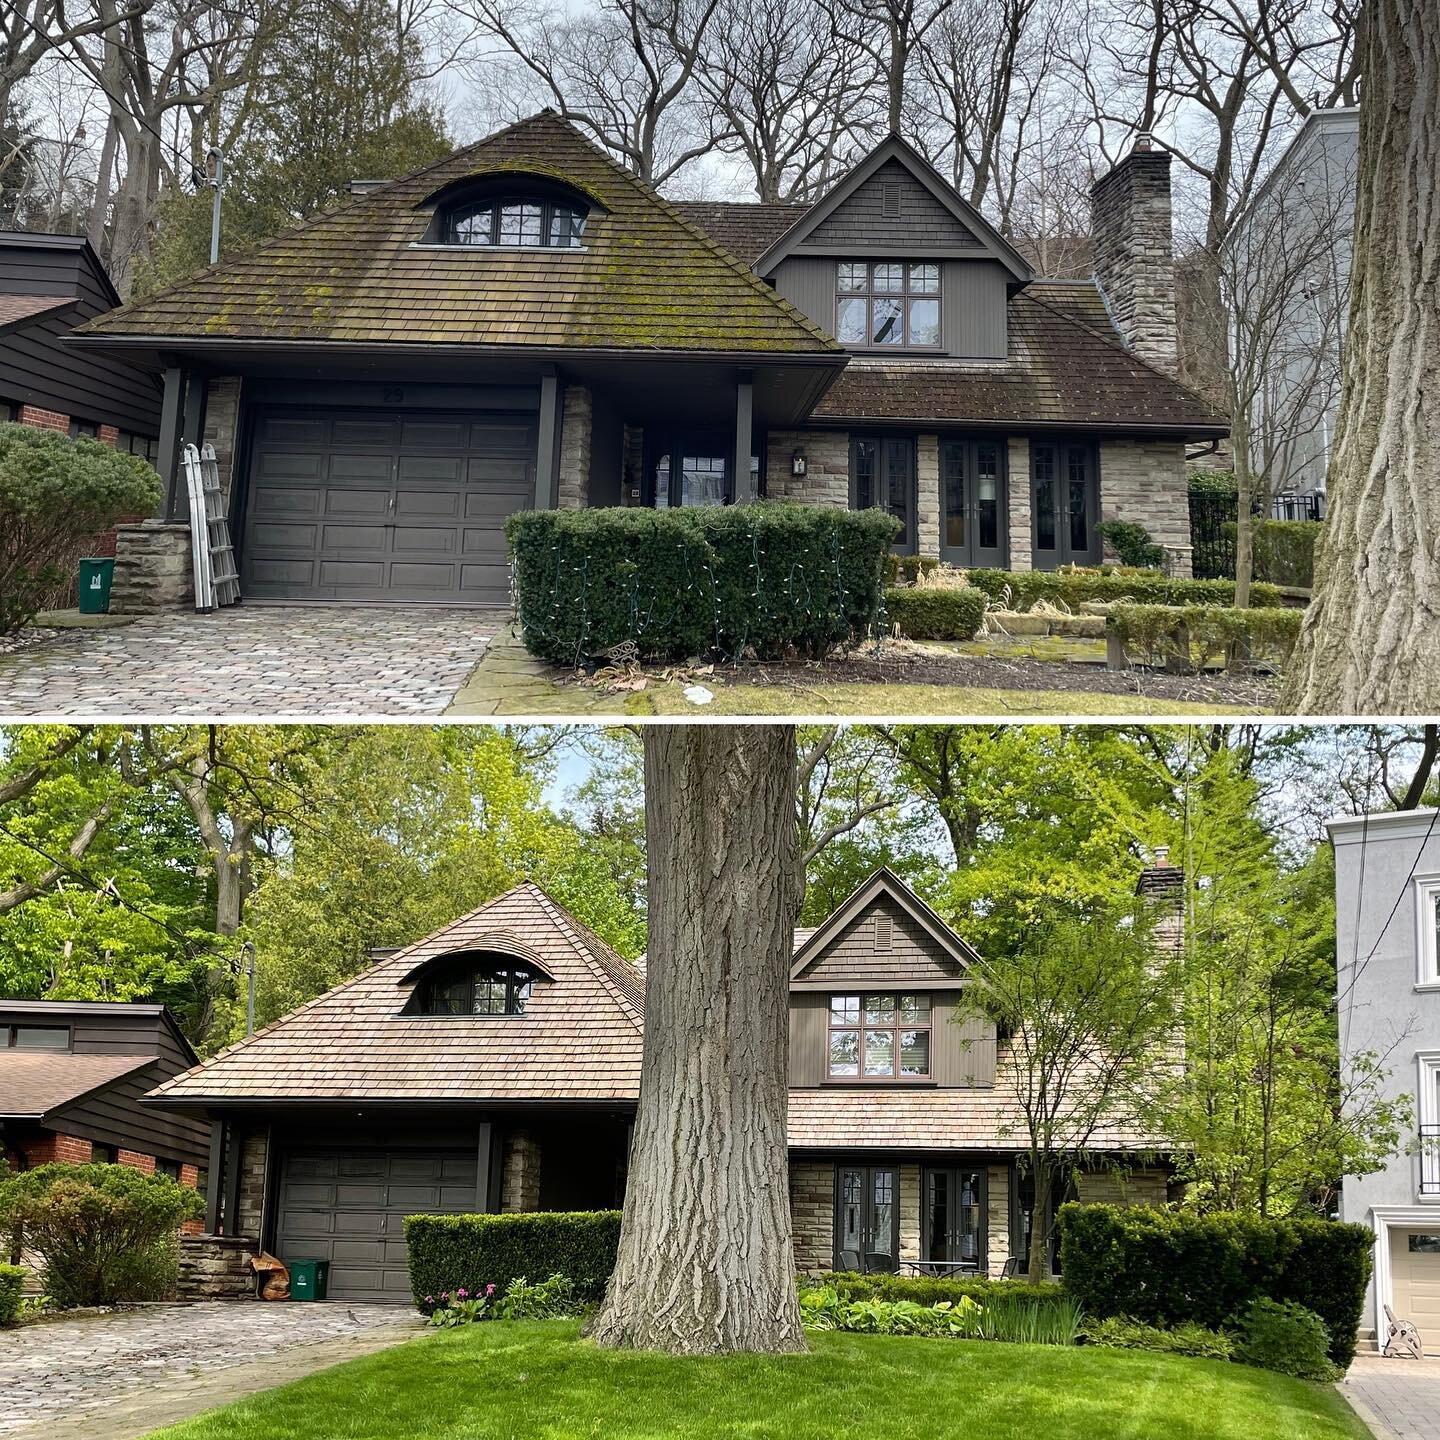 Etobicoke home revitalized!  15 years of moss and algae eradicated and many more years added to the lifespan of this cedar shake roof!

#cedarroofcleaning #mossremoval #cedarroofcleaningoakville  #cedarroofcleaningmississauga #softwashingcedar#pressu